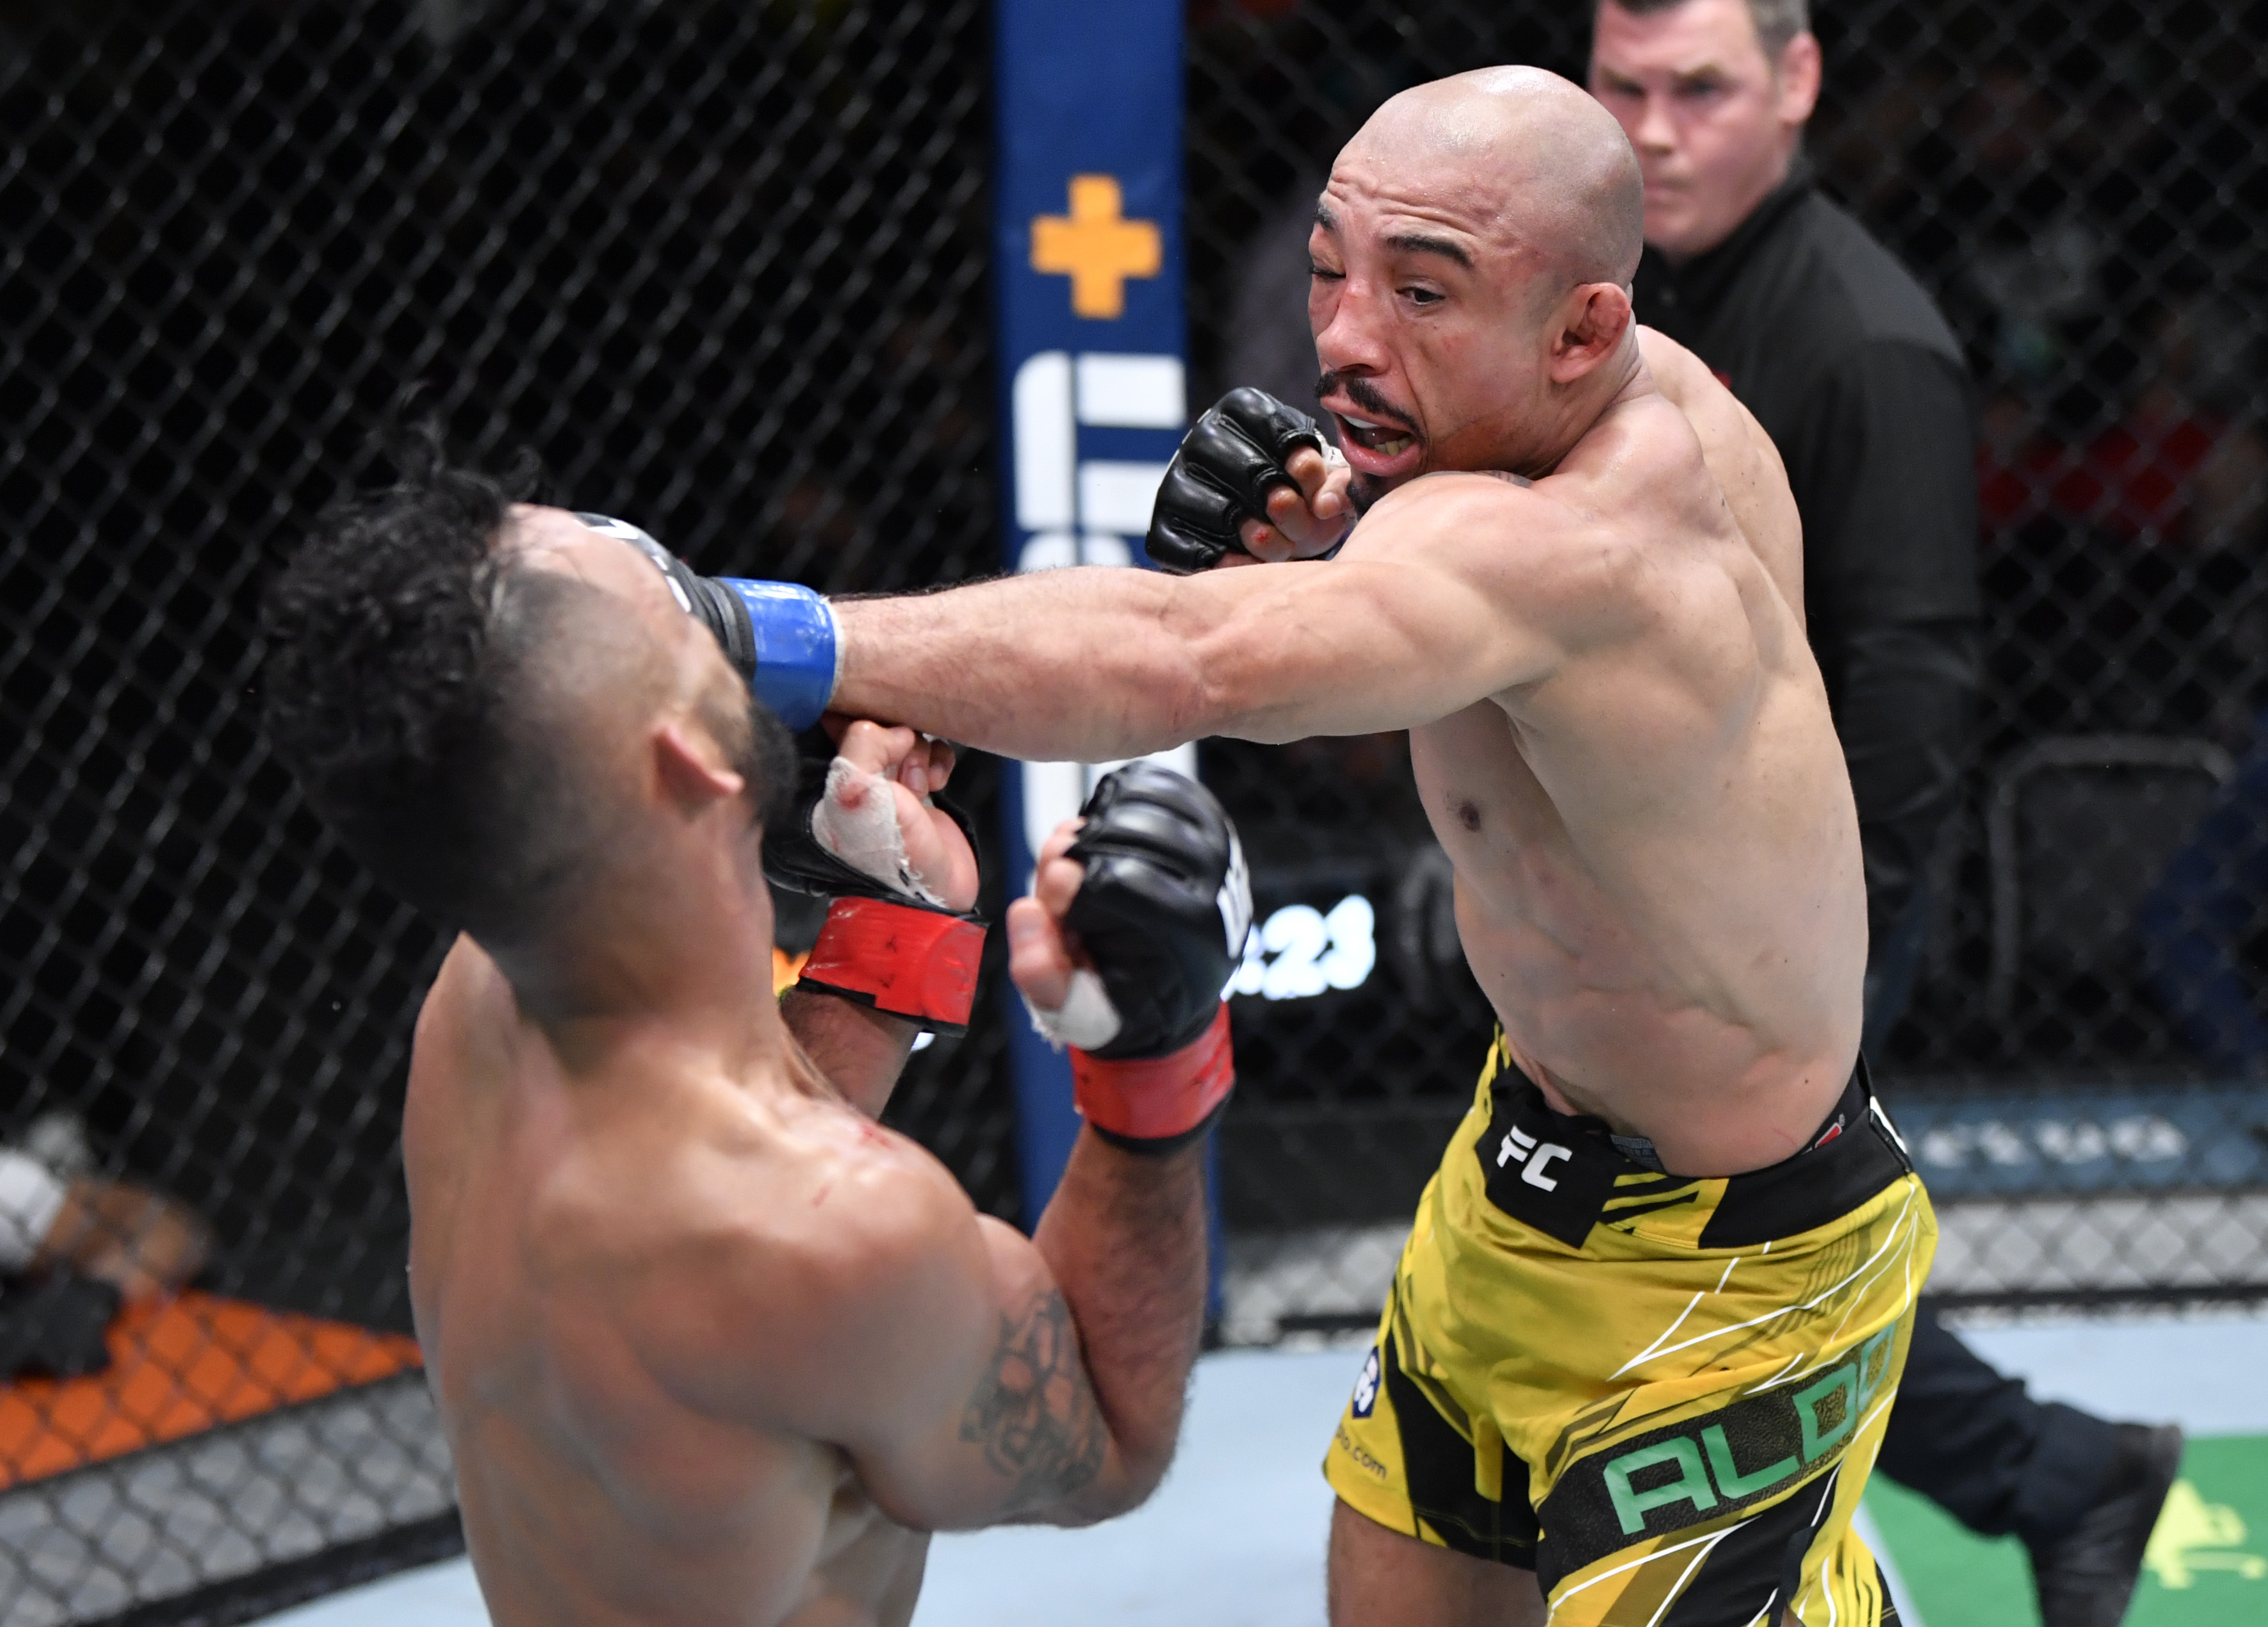 Jose Aldo hurt Rob Font on a few occasions to win a unanimous decision in the UFC Vegas 4 main event